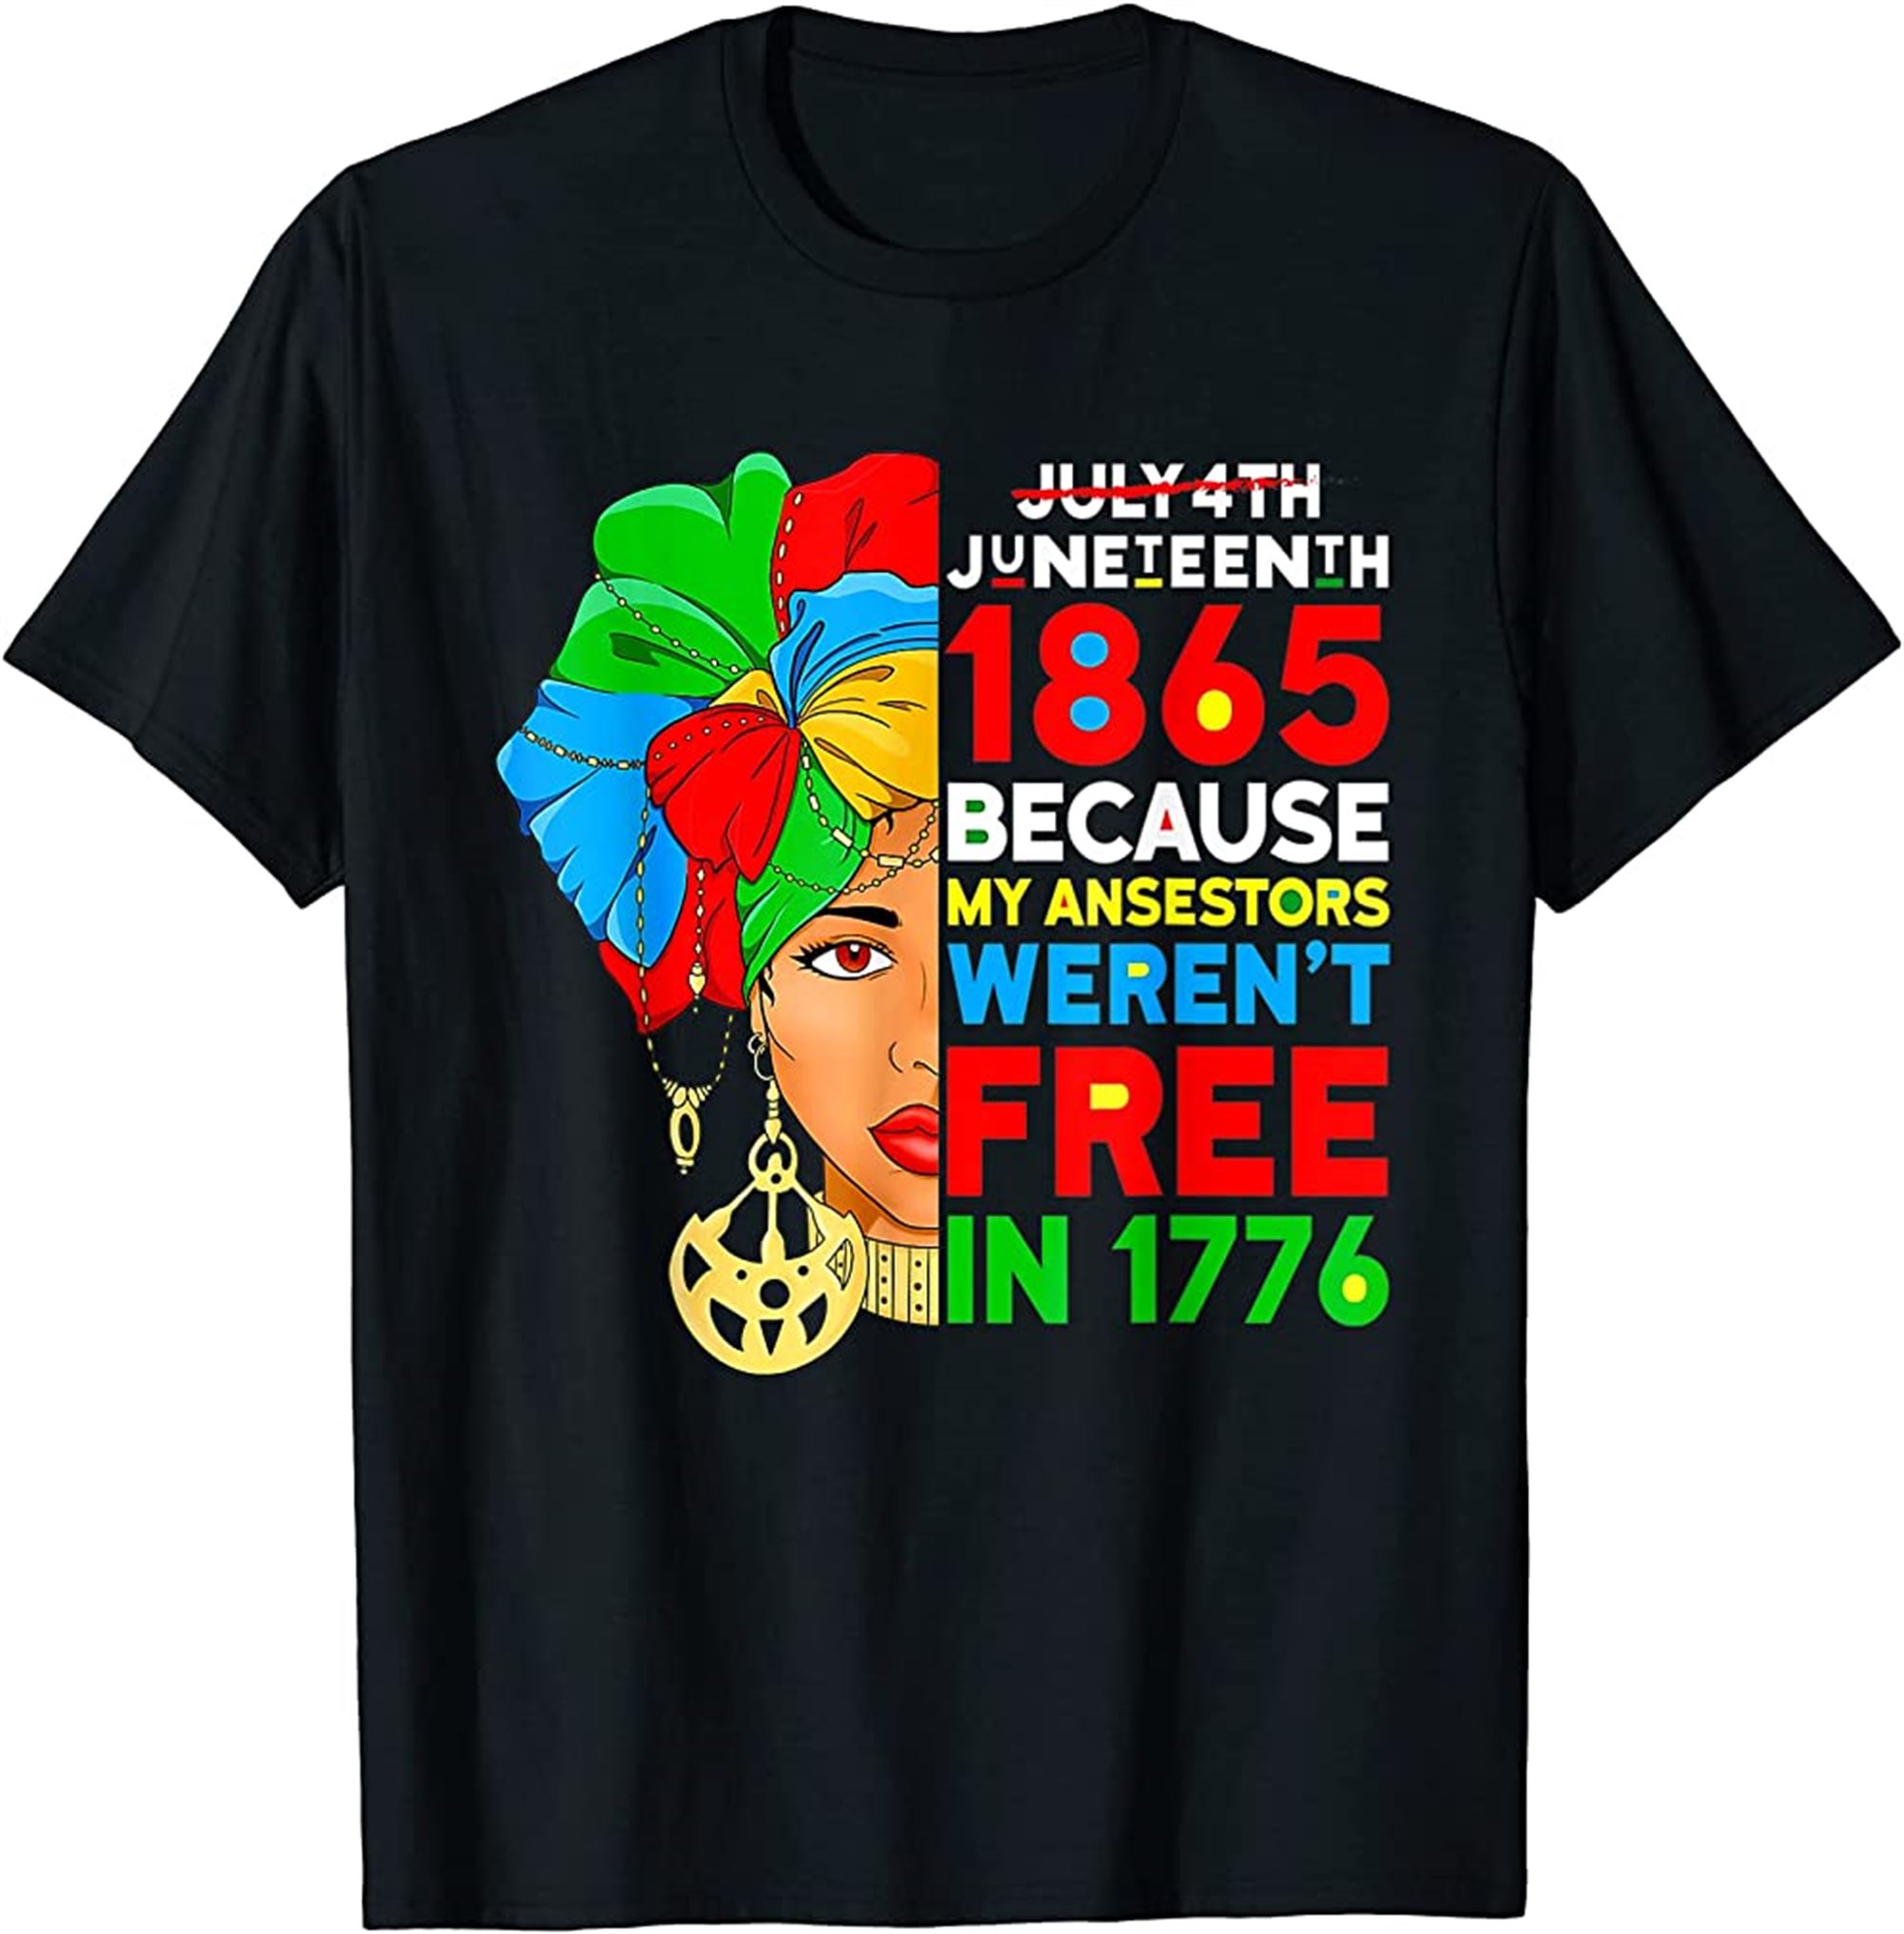 July 4th Juneteenth 1865 Because My Ancestors Werent Free T-shirt Full Size Up To 5xl